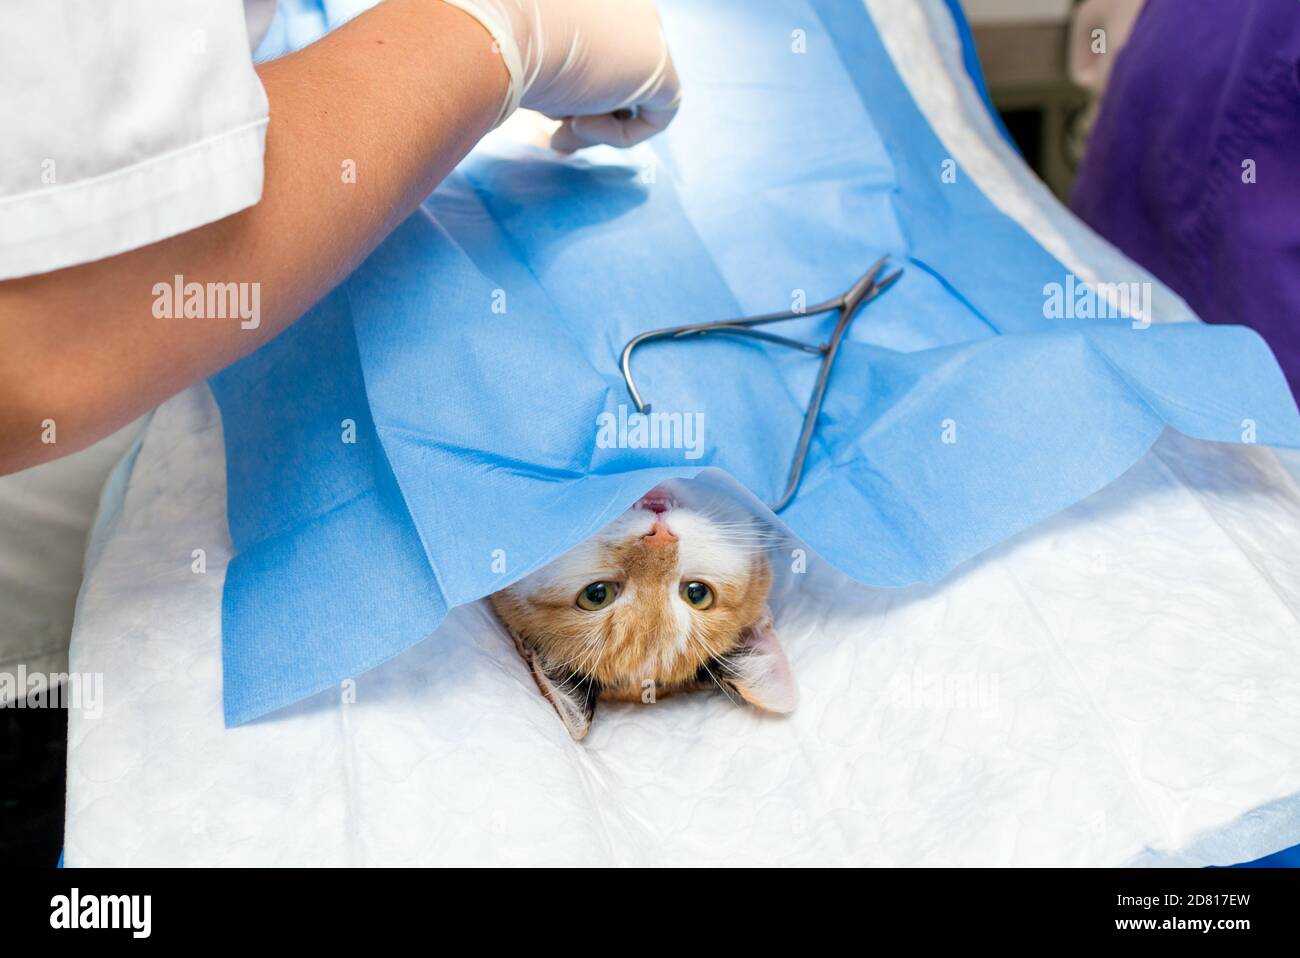 Closeup image cat on the operating table and veterinary surgery. cat abdominal surgery at veterinary clinic Stock Photo